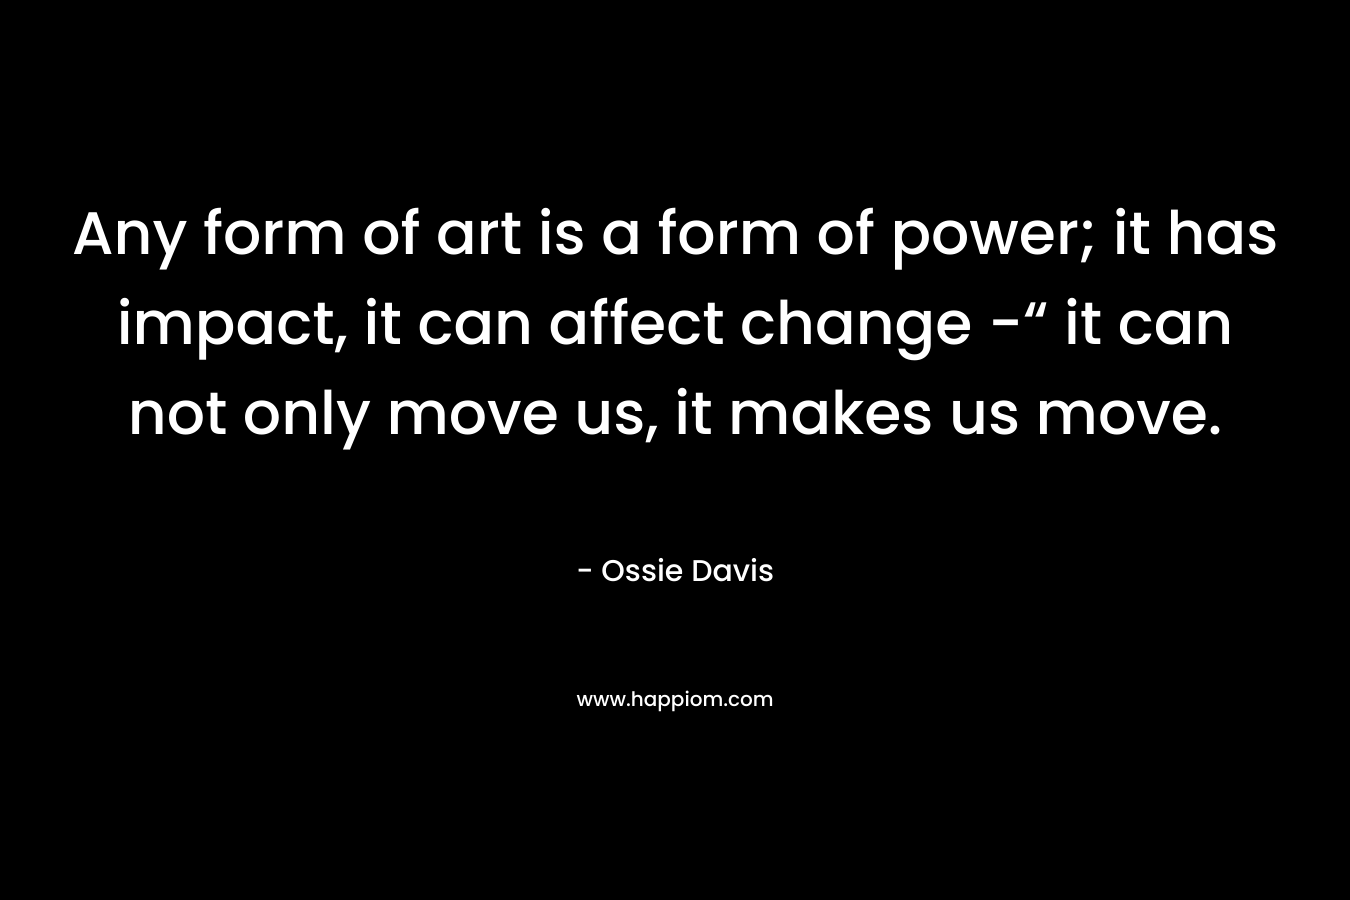 Any form of art is a form of power; it has impact, it can affect change -“ it can not only move us, it makes us move.